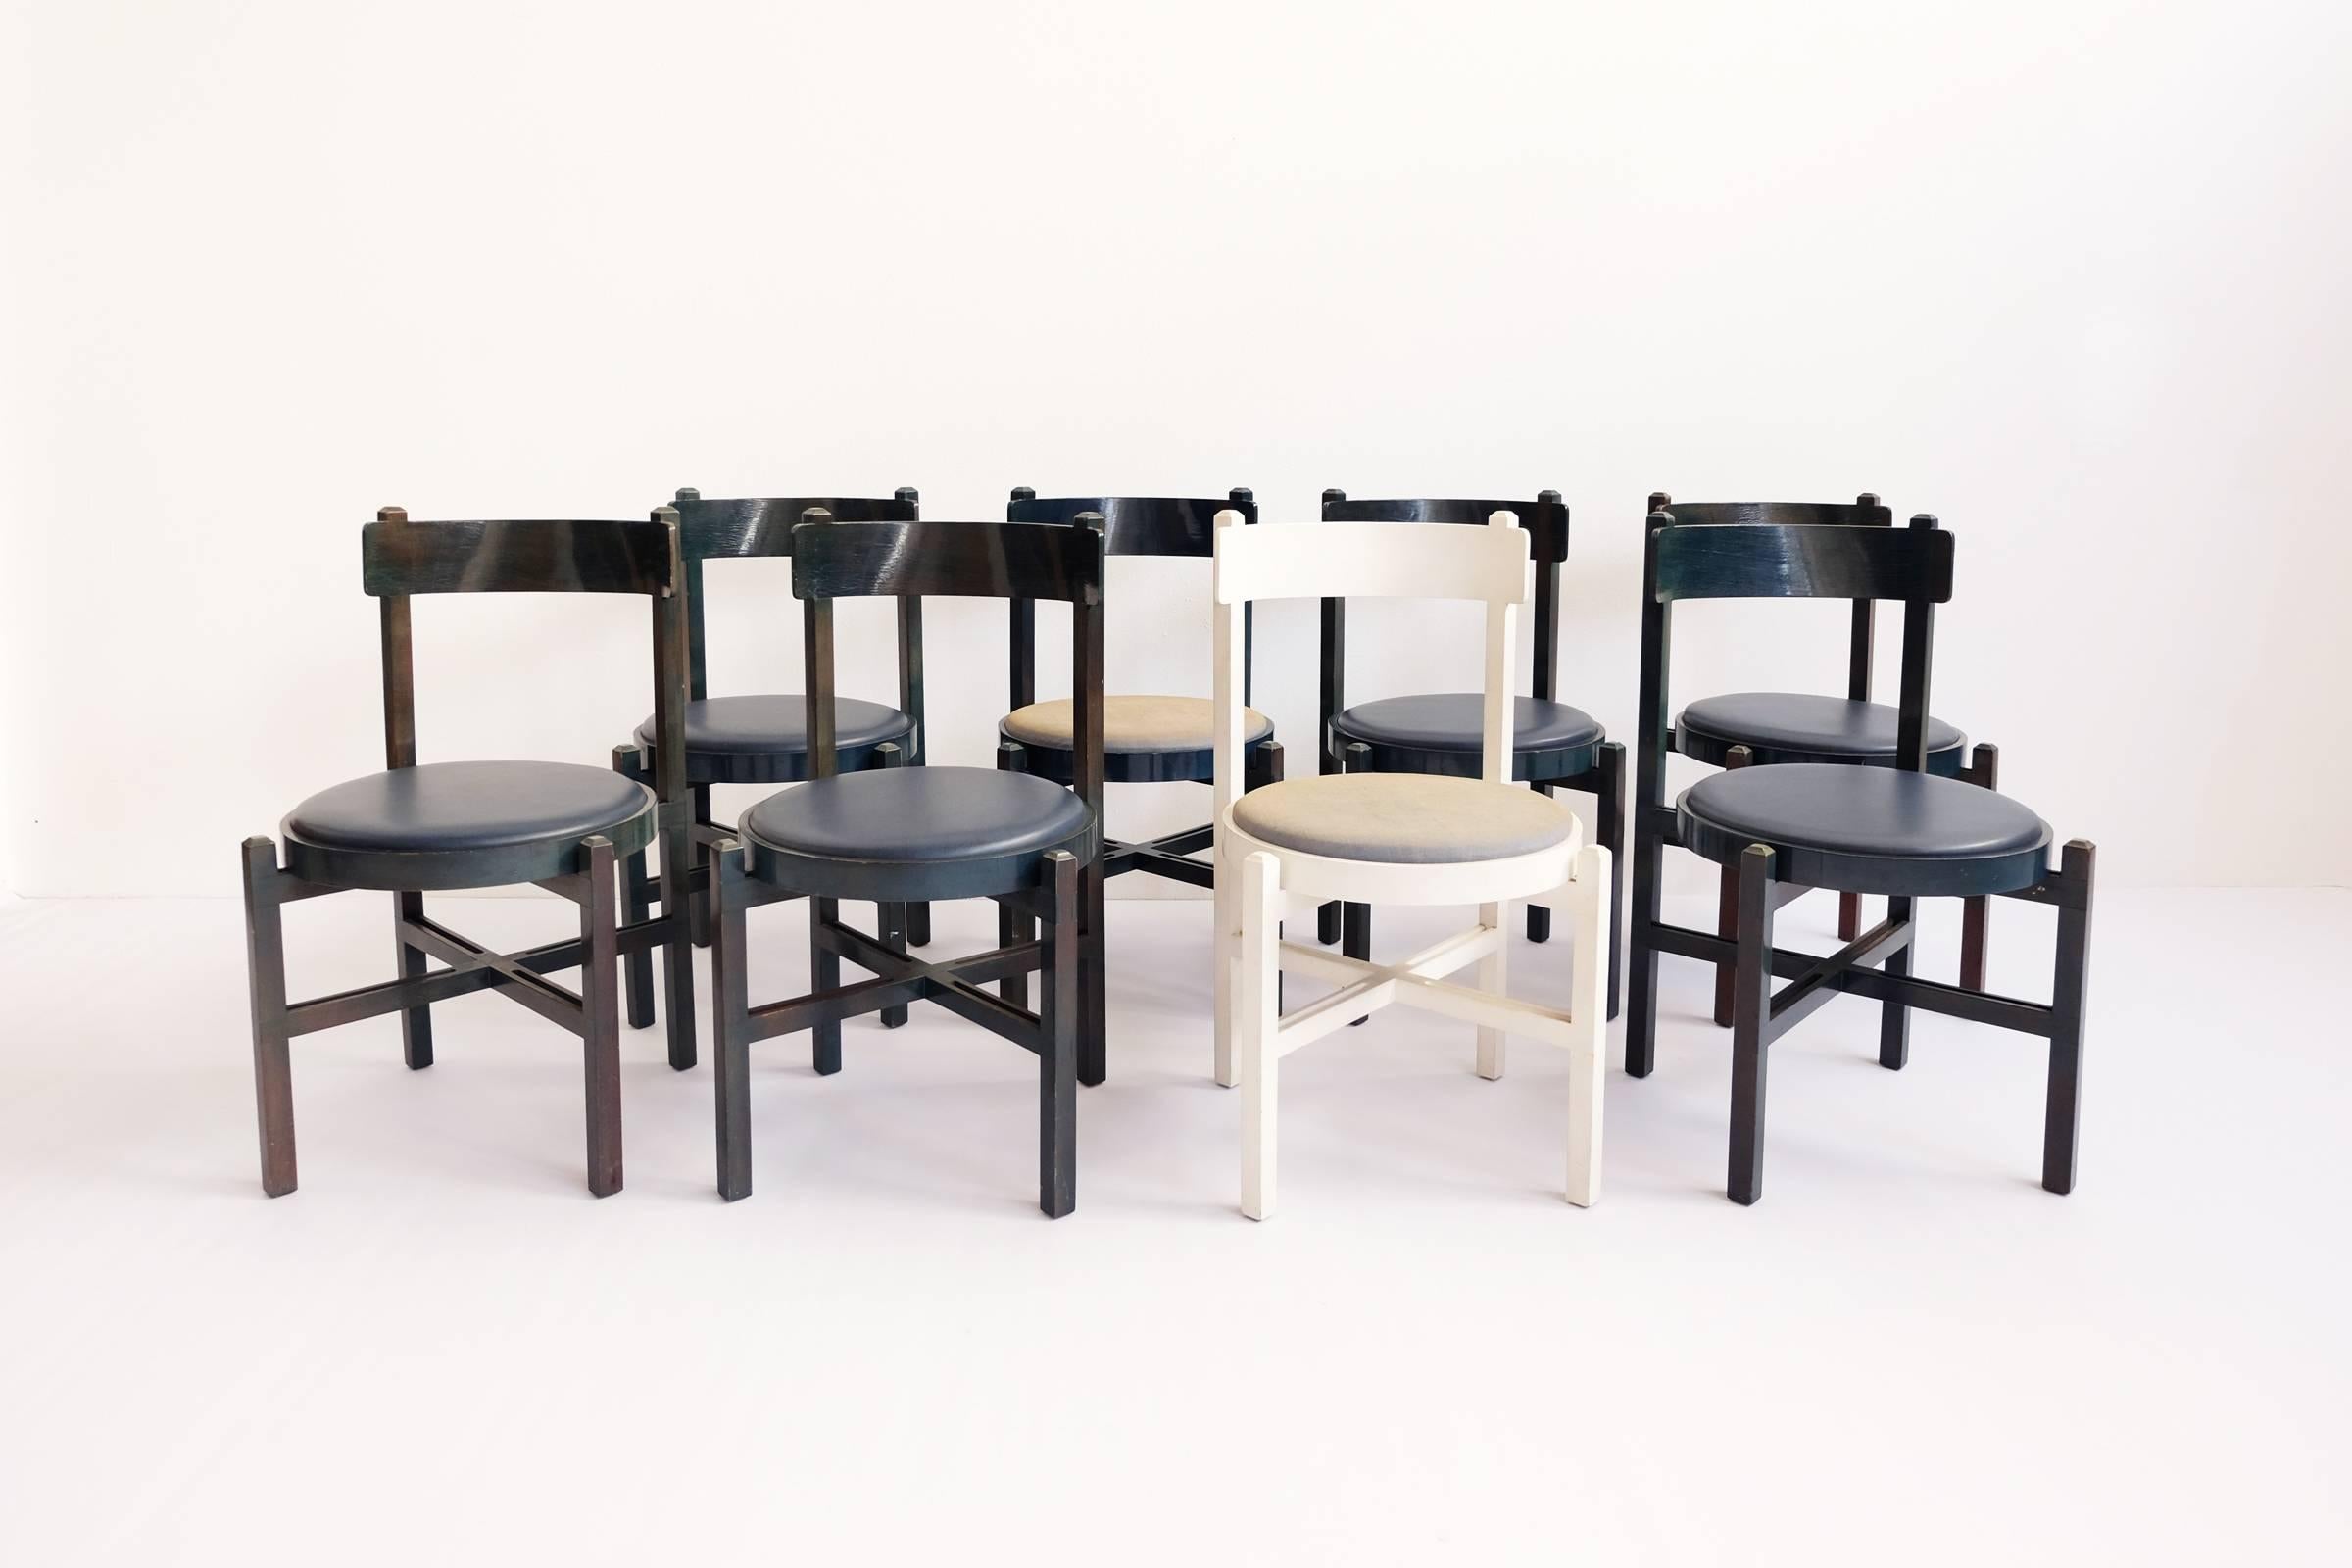 Chairs by a renovated and furnished house in Lenno, Como Lake made by Ico & Luisa Parisi,
1962.

Material:
Lacquered wood, skai, fabric

Dimension
42 x 50 x seating HT. 45 cm
Total HT. 79 cm.